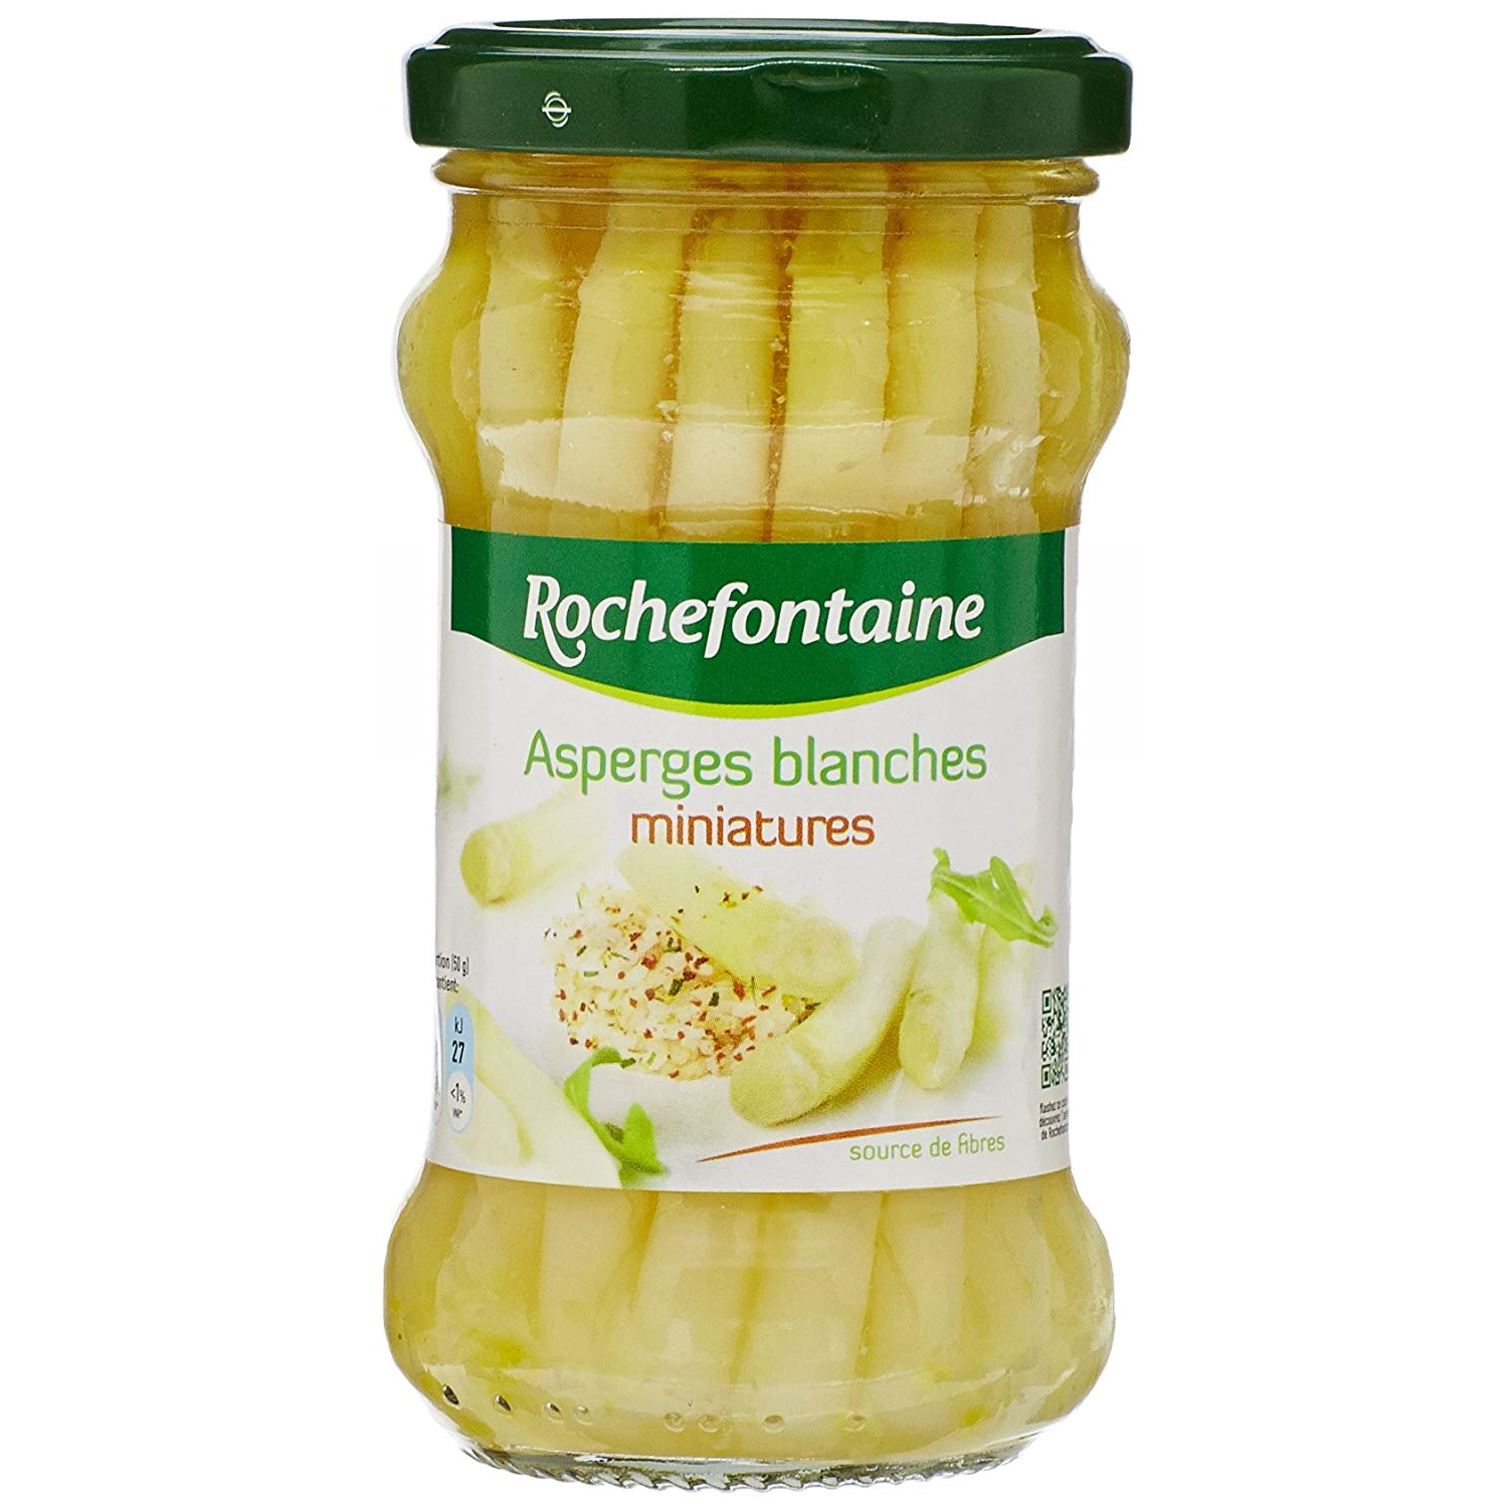 Asperges blanches miniatures